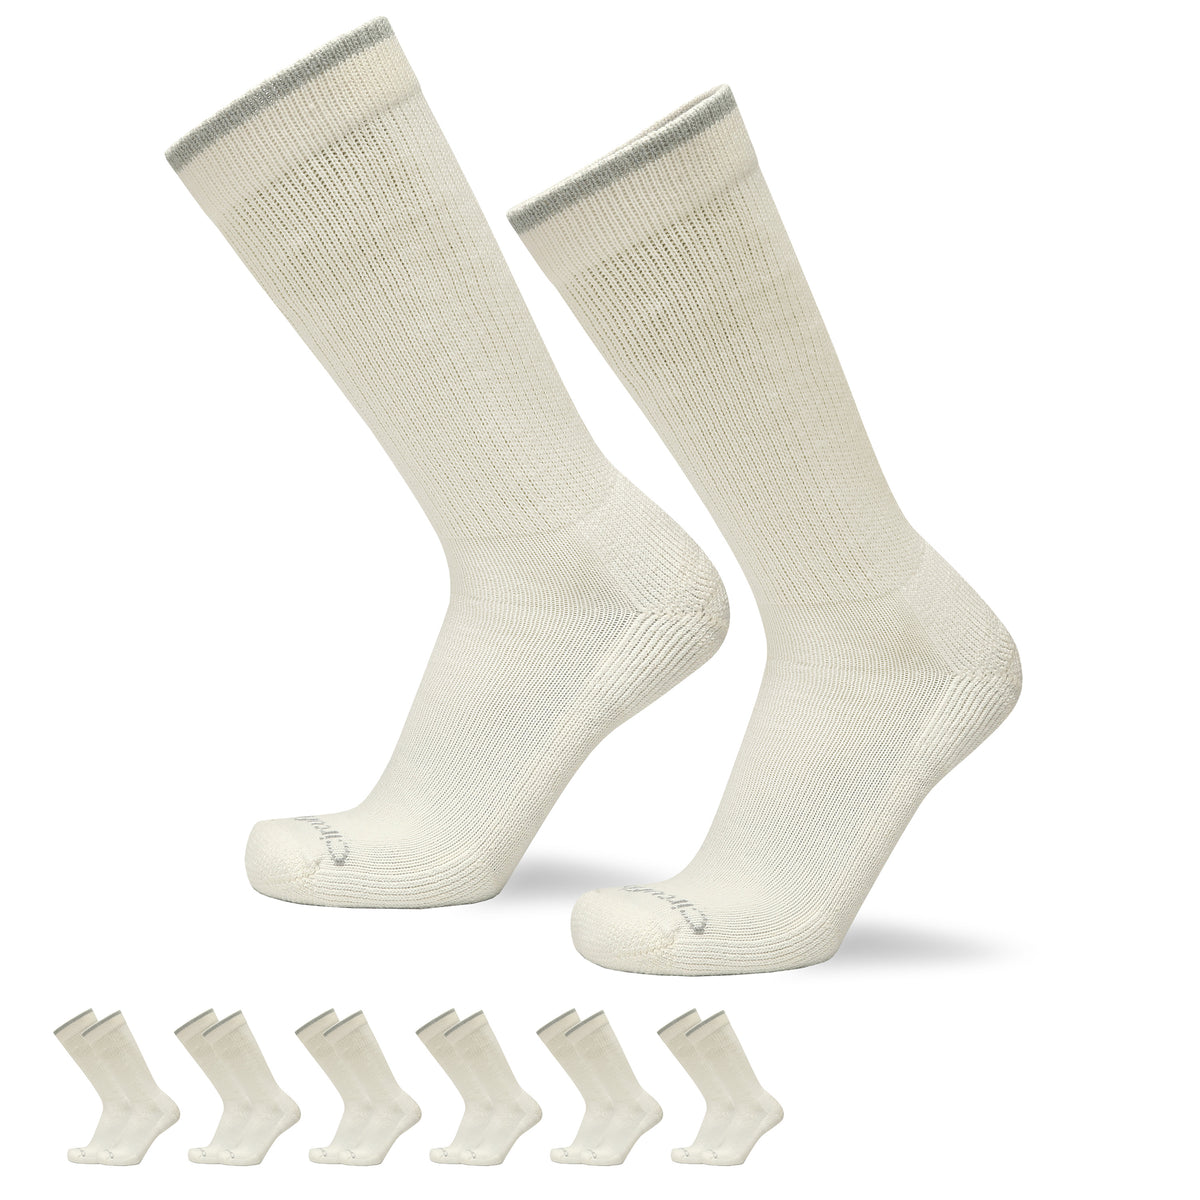 Our Sock Collections - Circufiber